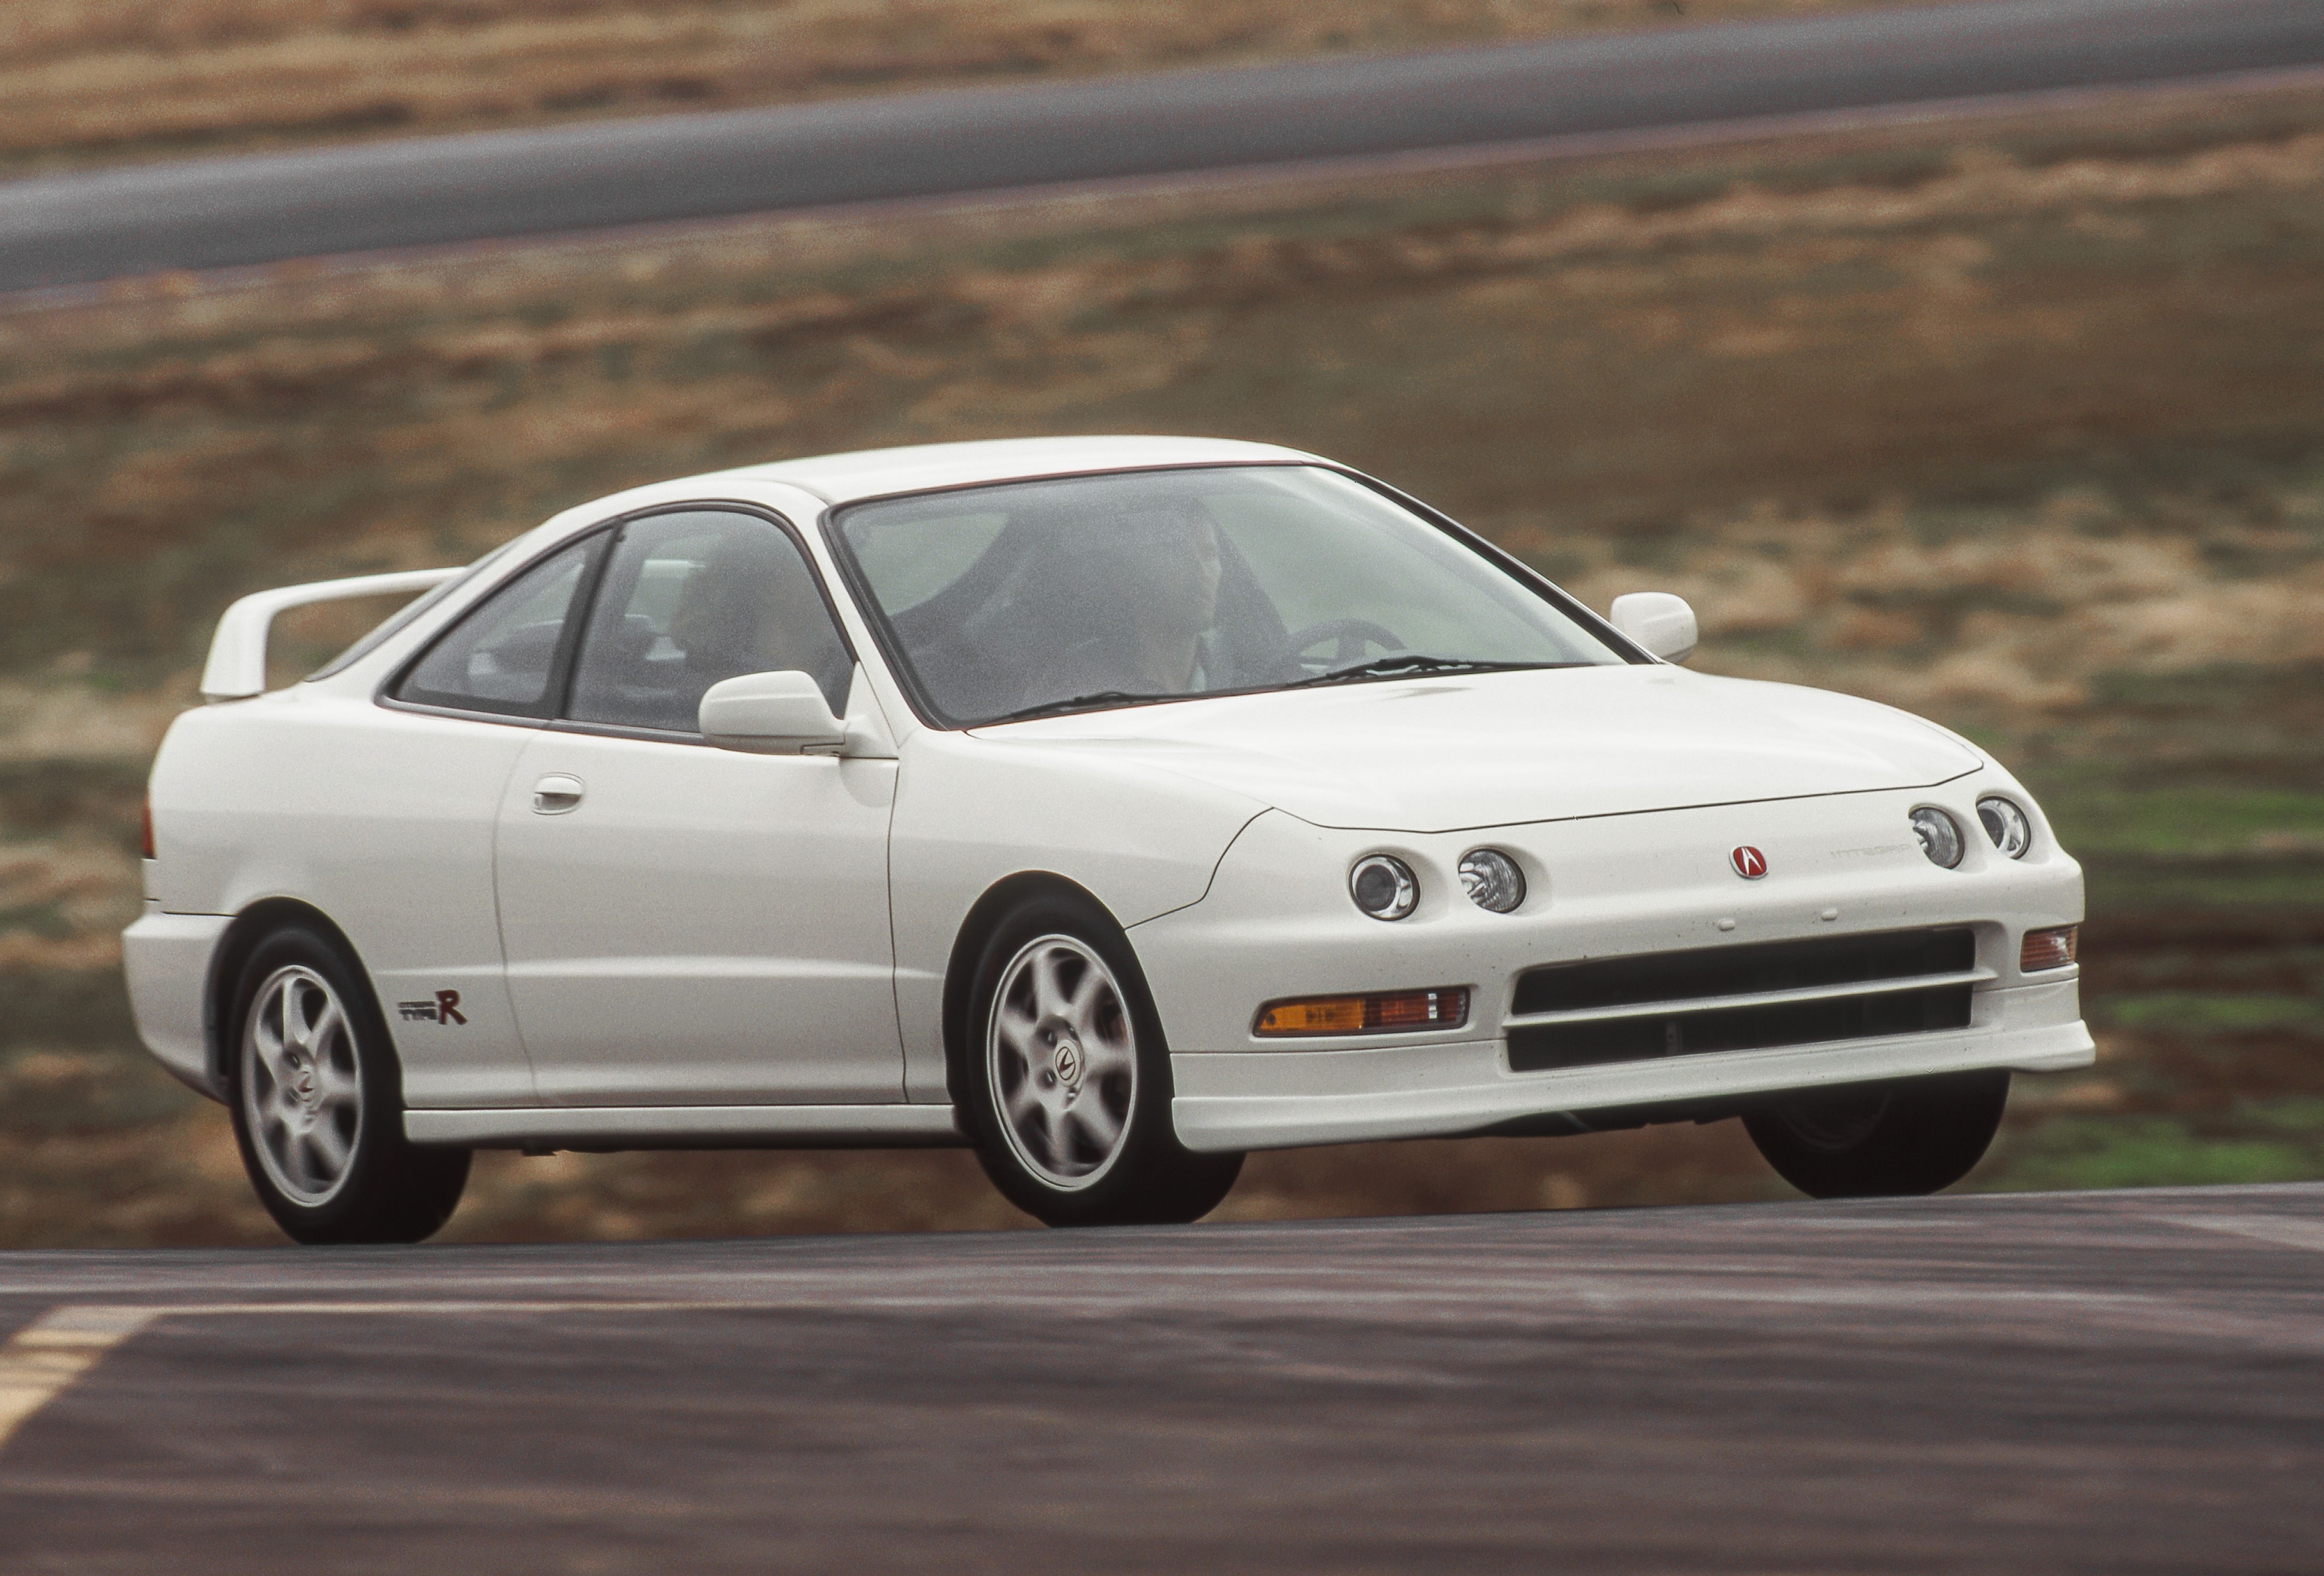 Tested 1997 Acura Integra Type R Rewards Enthusiasts At 8400 Rpm